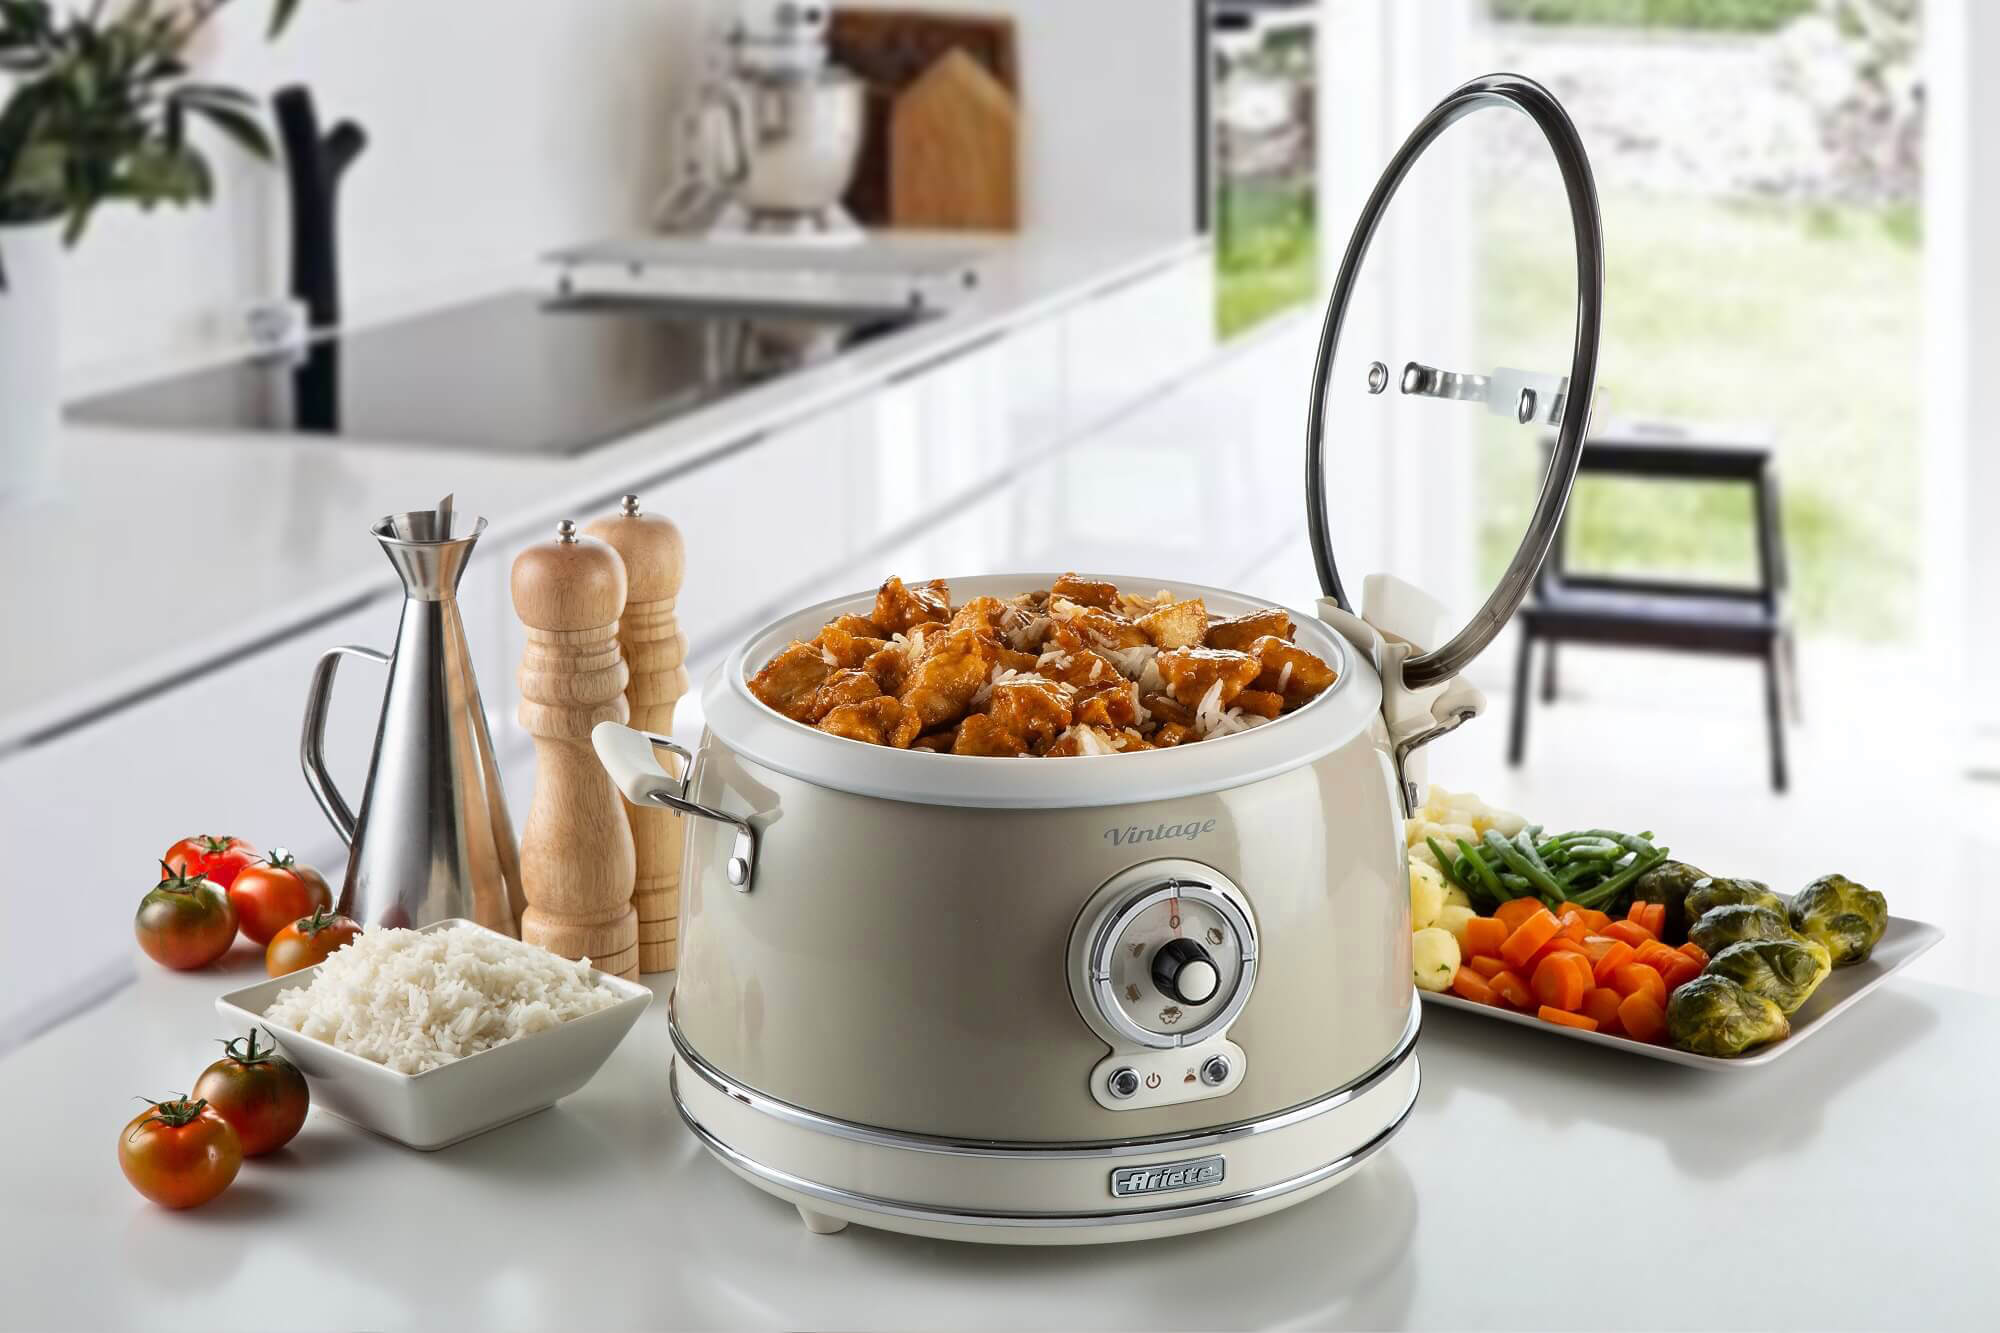 & Rice Rice Slow Cooker Electric | Cooker Beige | Ariete Cooker